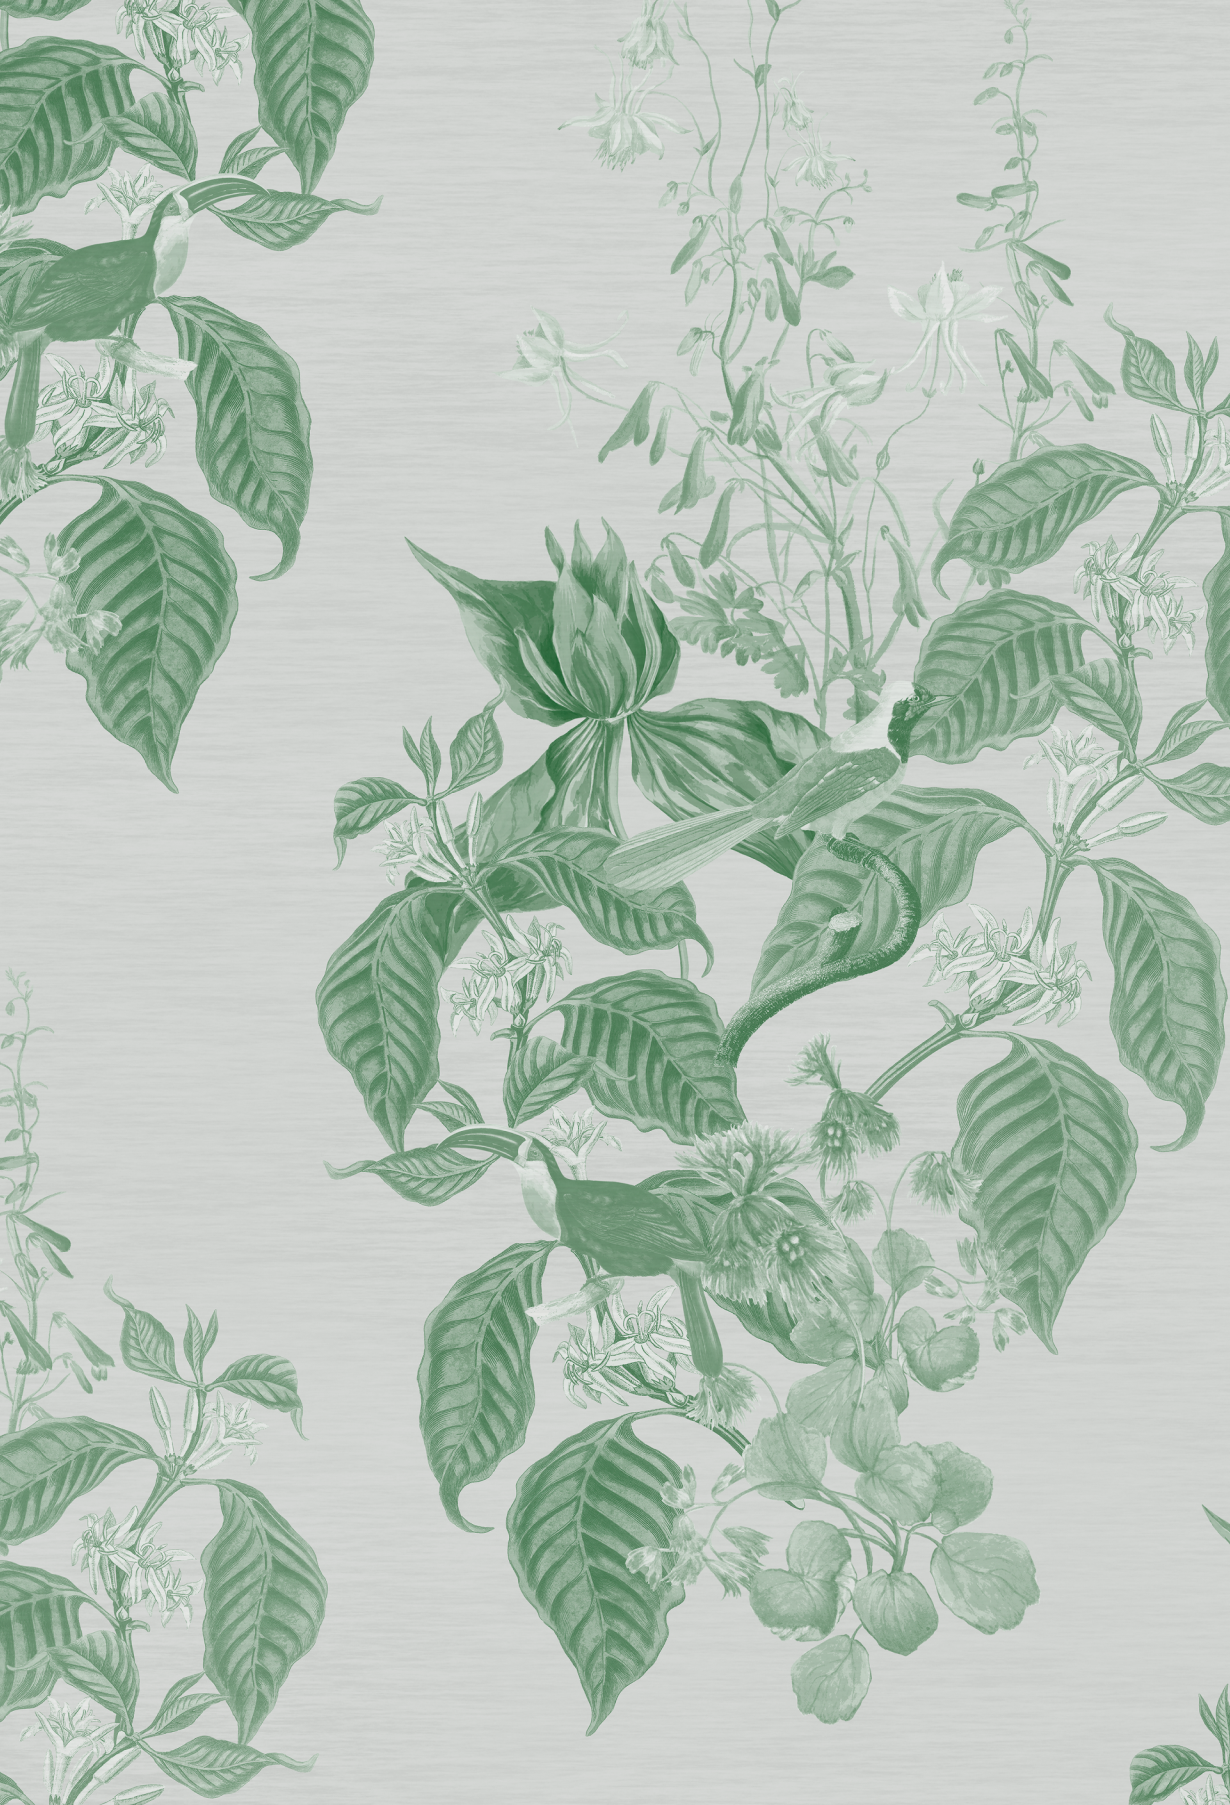 Green illustration of botanical birds in a meadow by Deus ex Gardenia Aviary Isle wallpaper in Leaf.